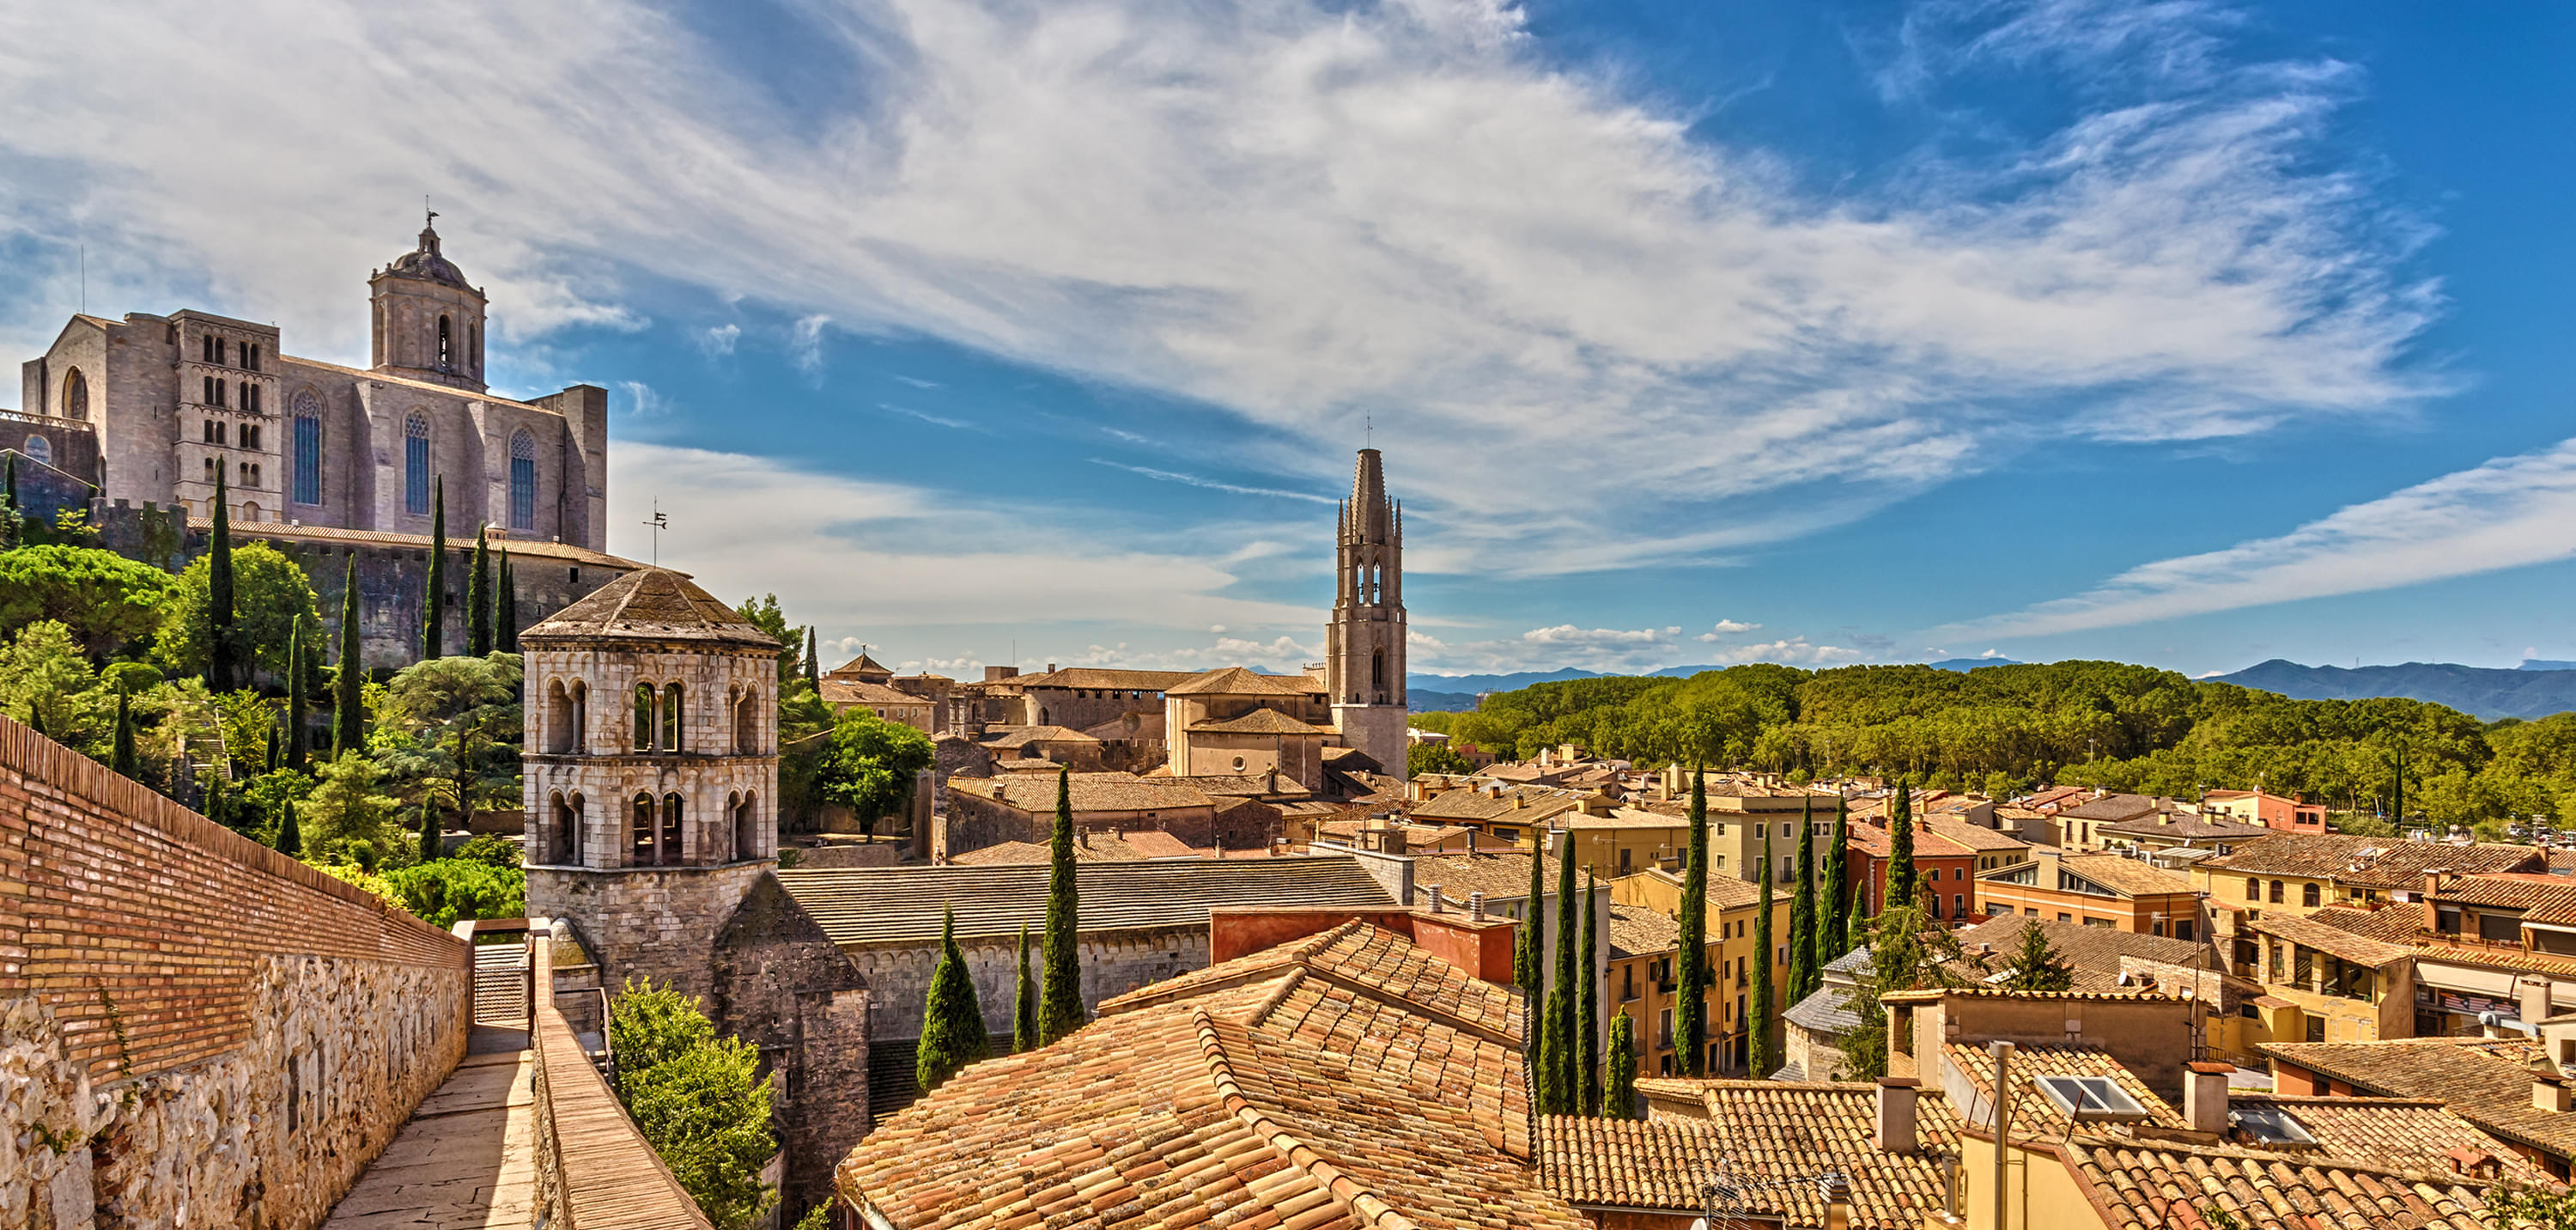 Visit the famous city of Girona and fall in love with its ancient architecture